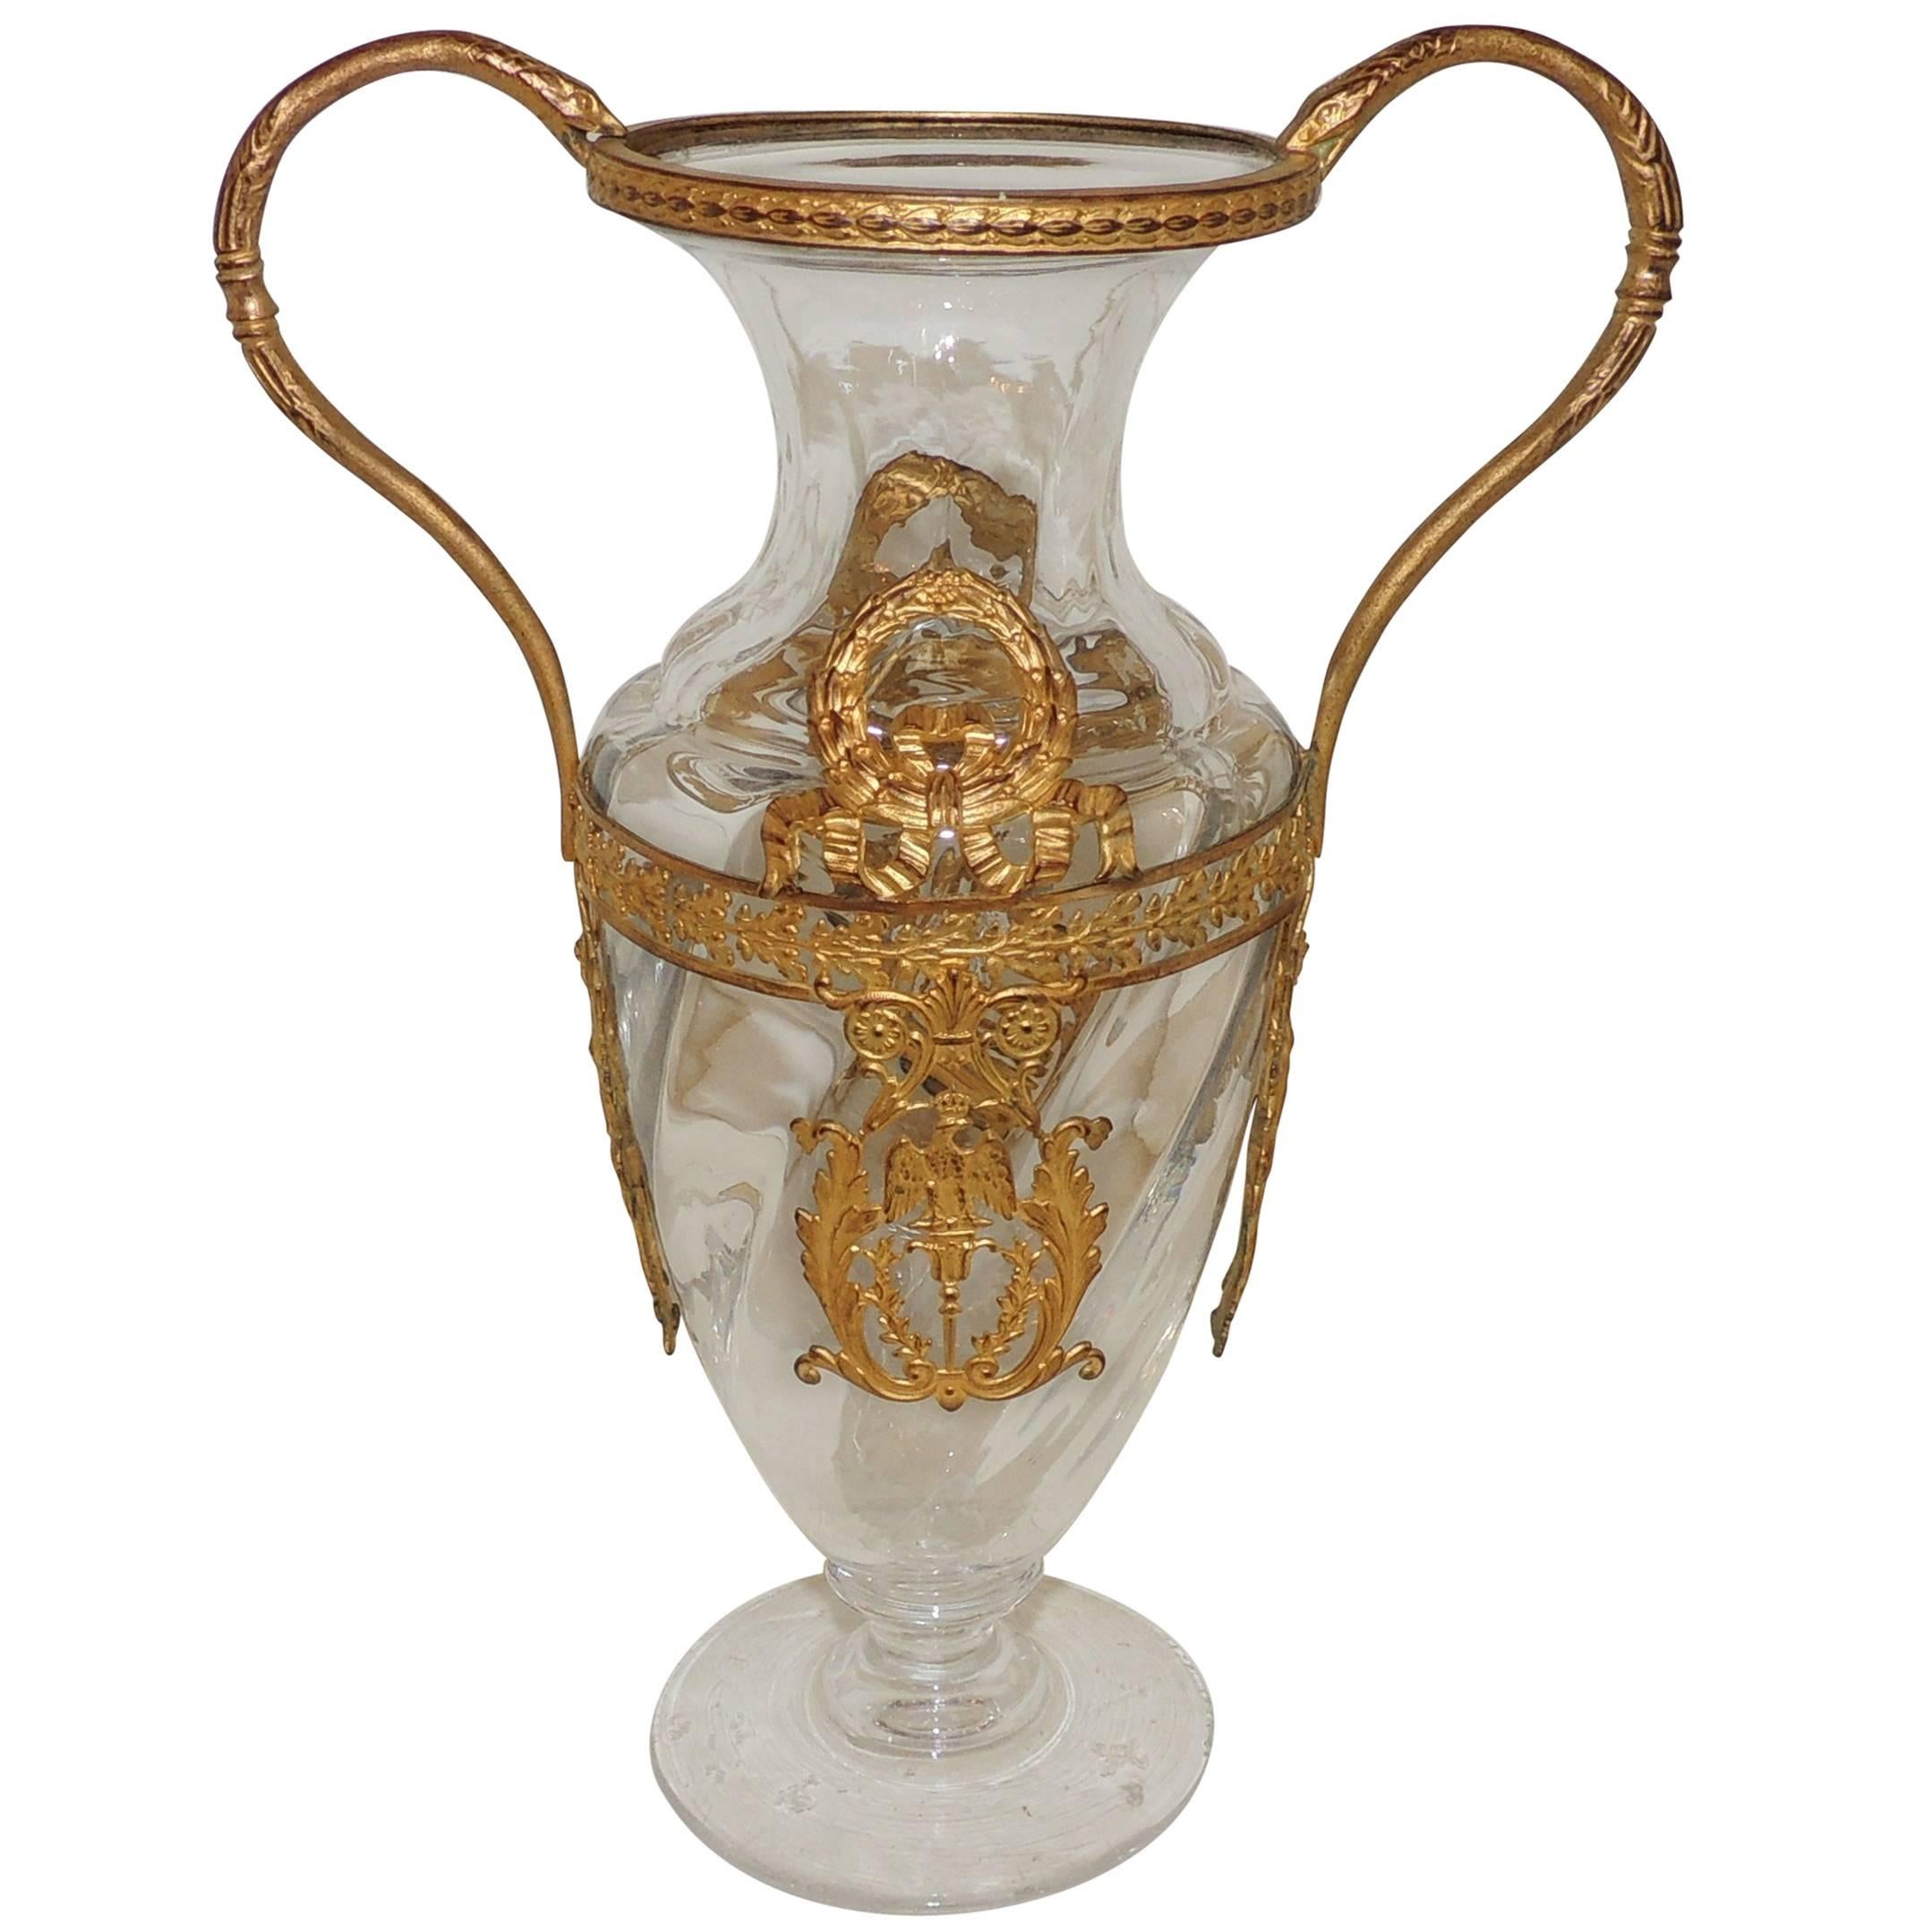 Wonderful French Bronze Ormolu-Mounted Crystal Floral and Ribbon Fluted Vase